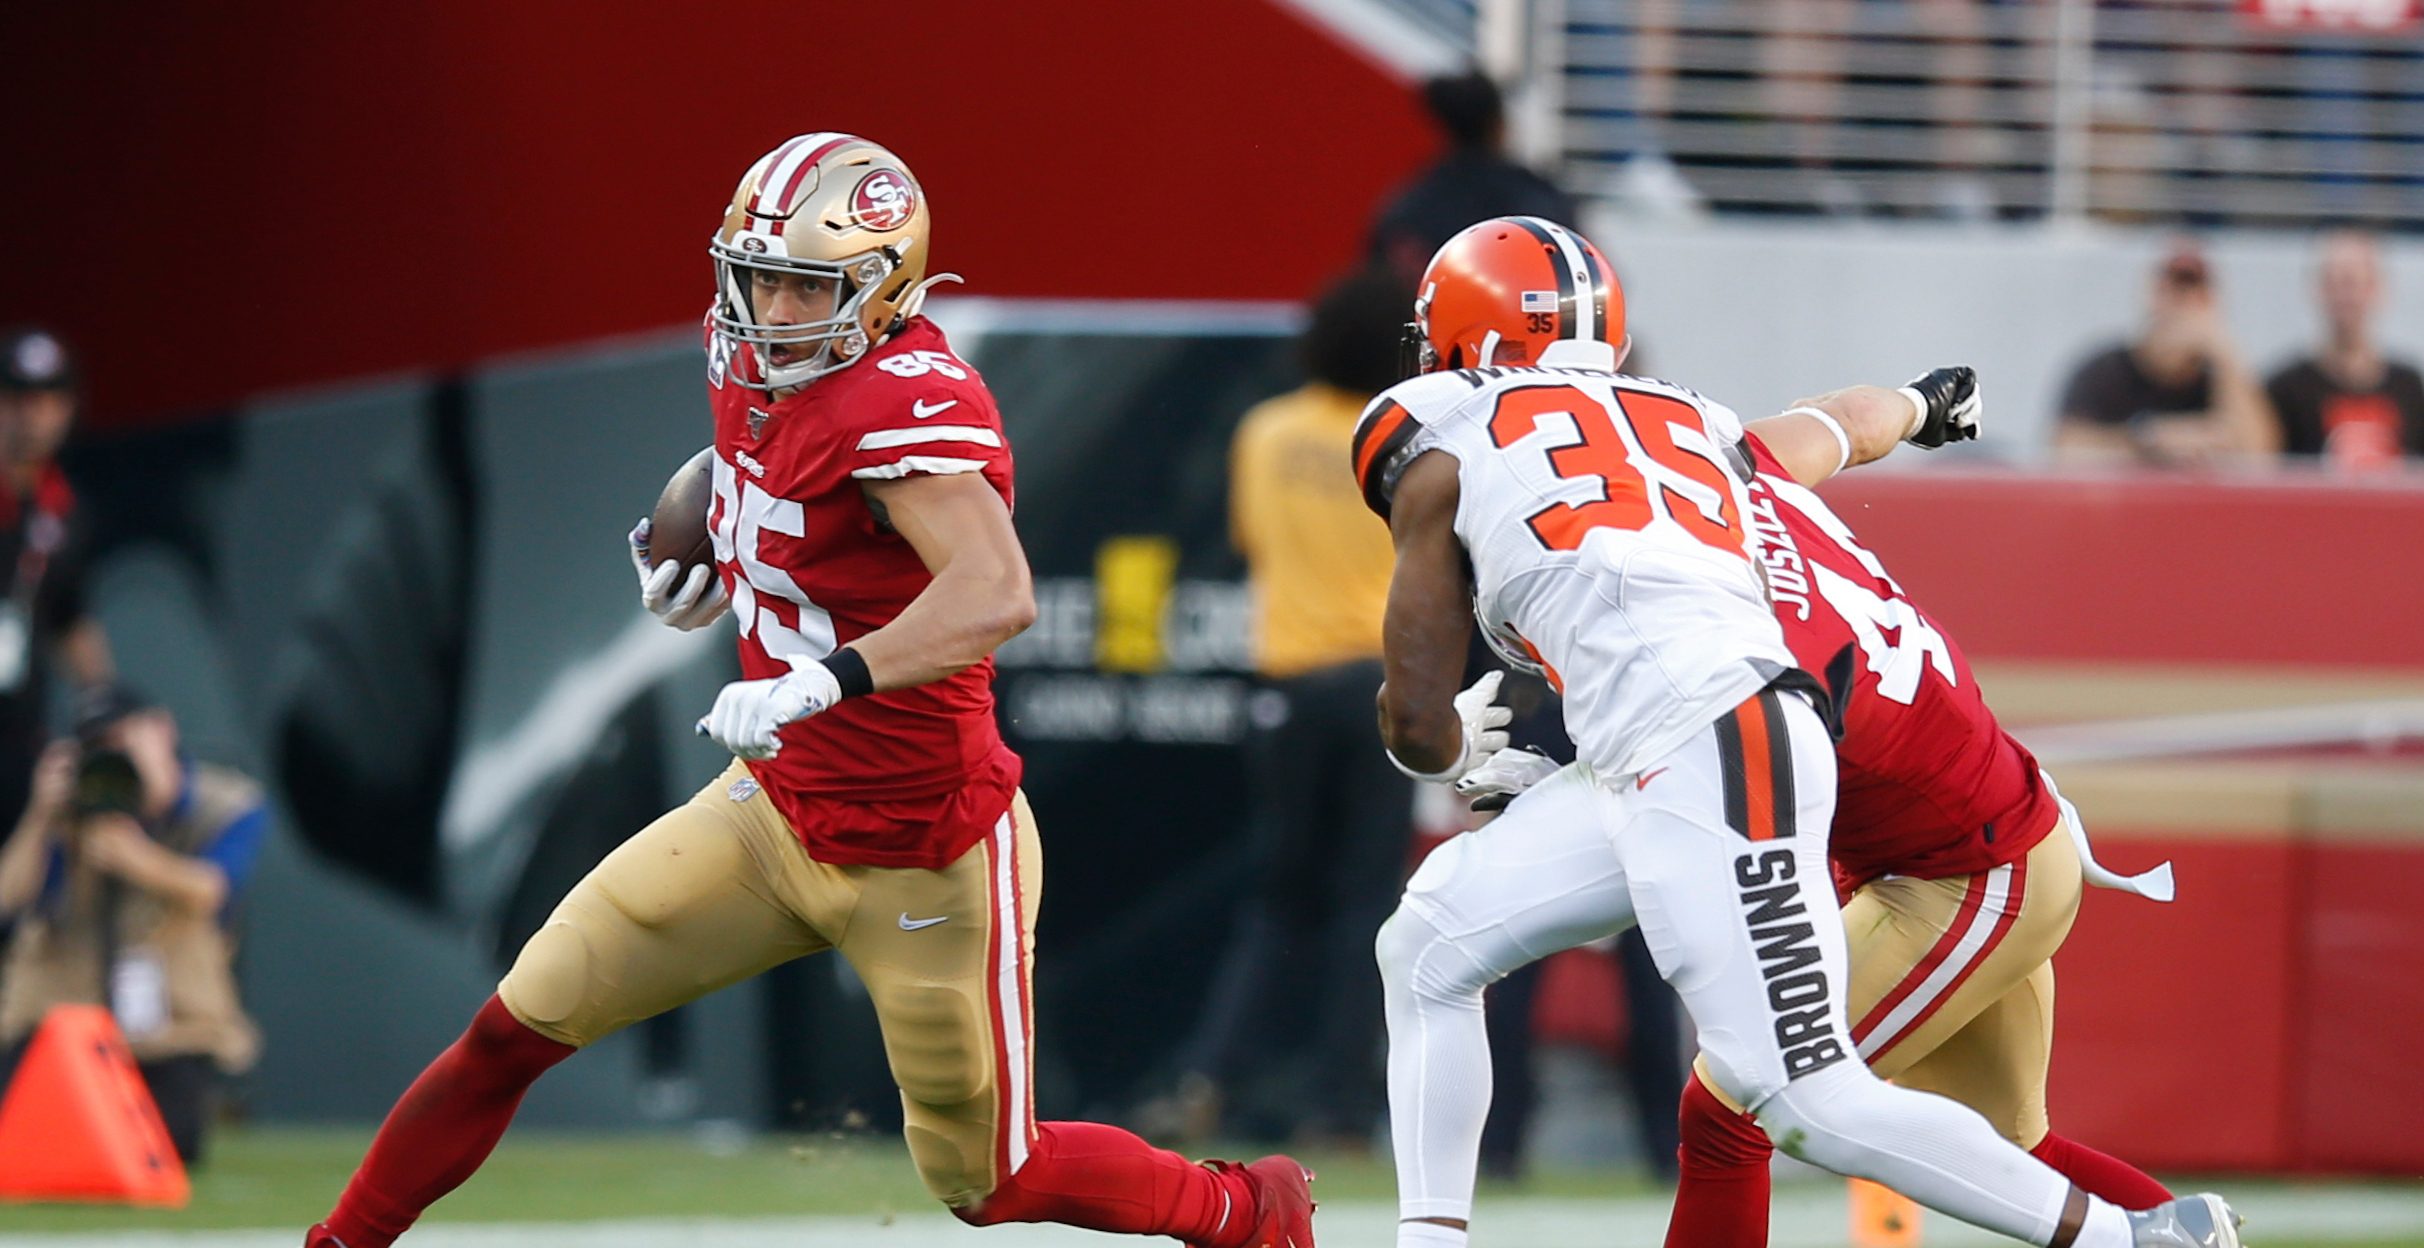 NFL Week 6 streaming guide: How to watch the San Francisco 49ers